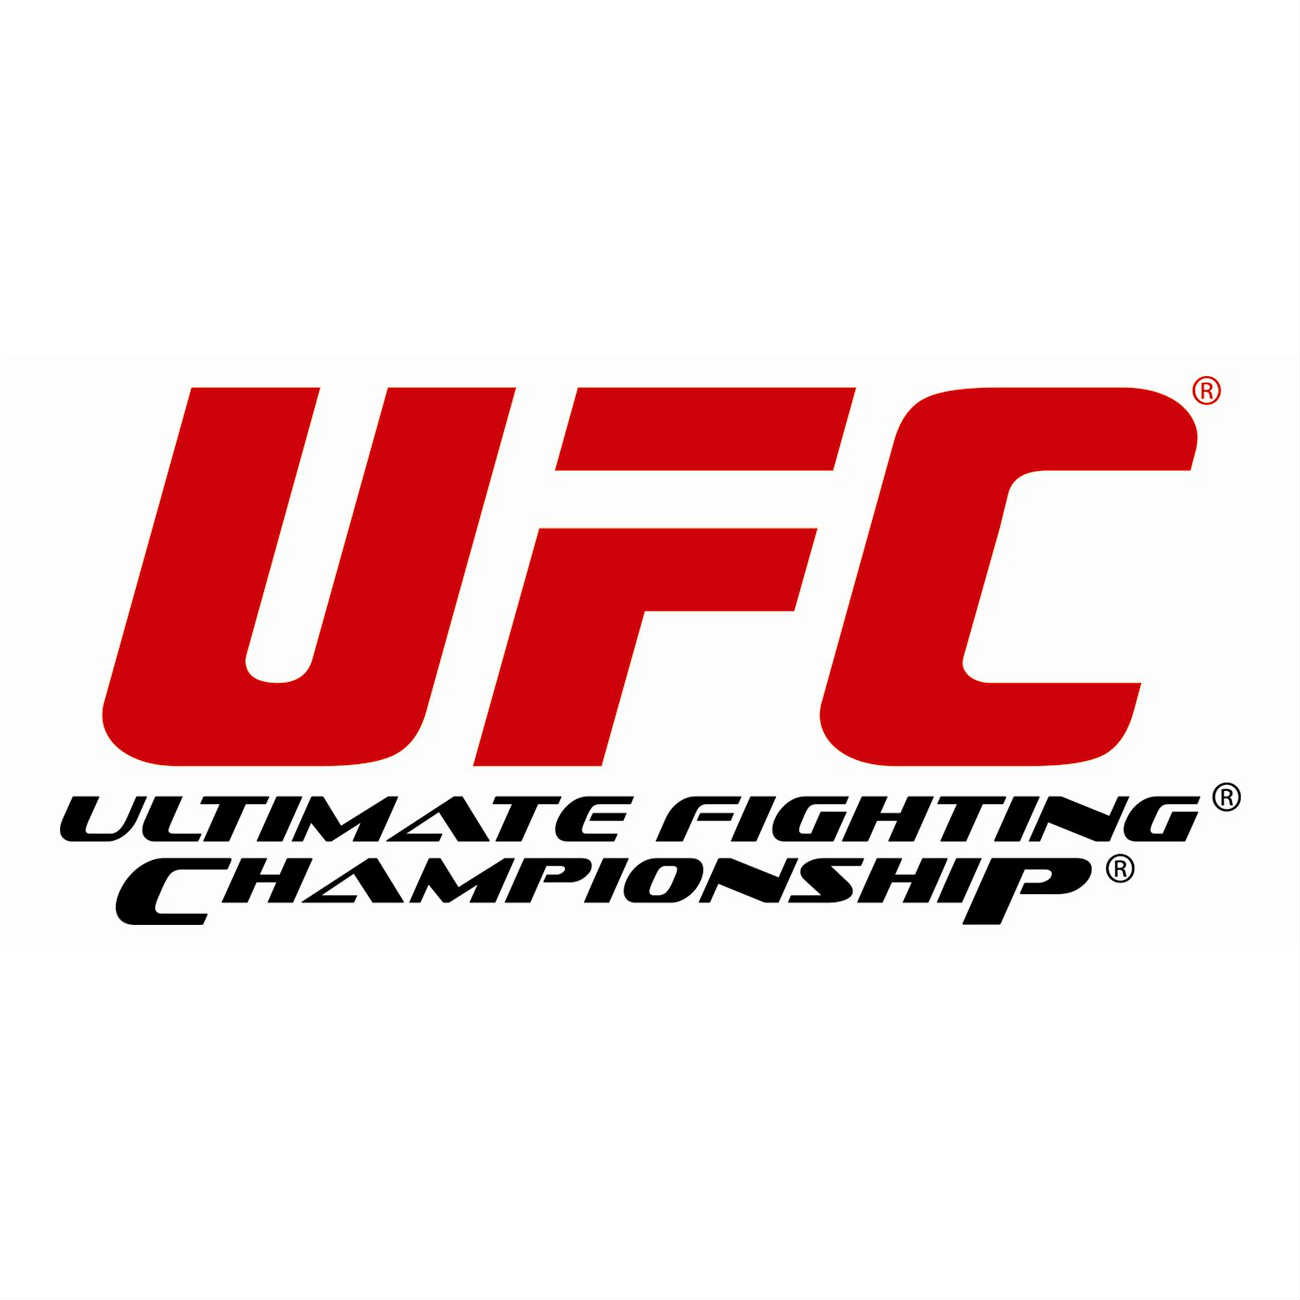 Where to watch UFC Fights in Cairns